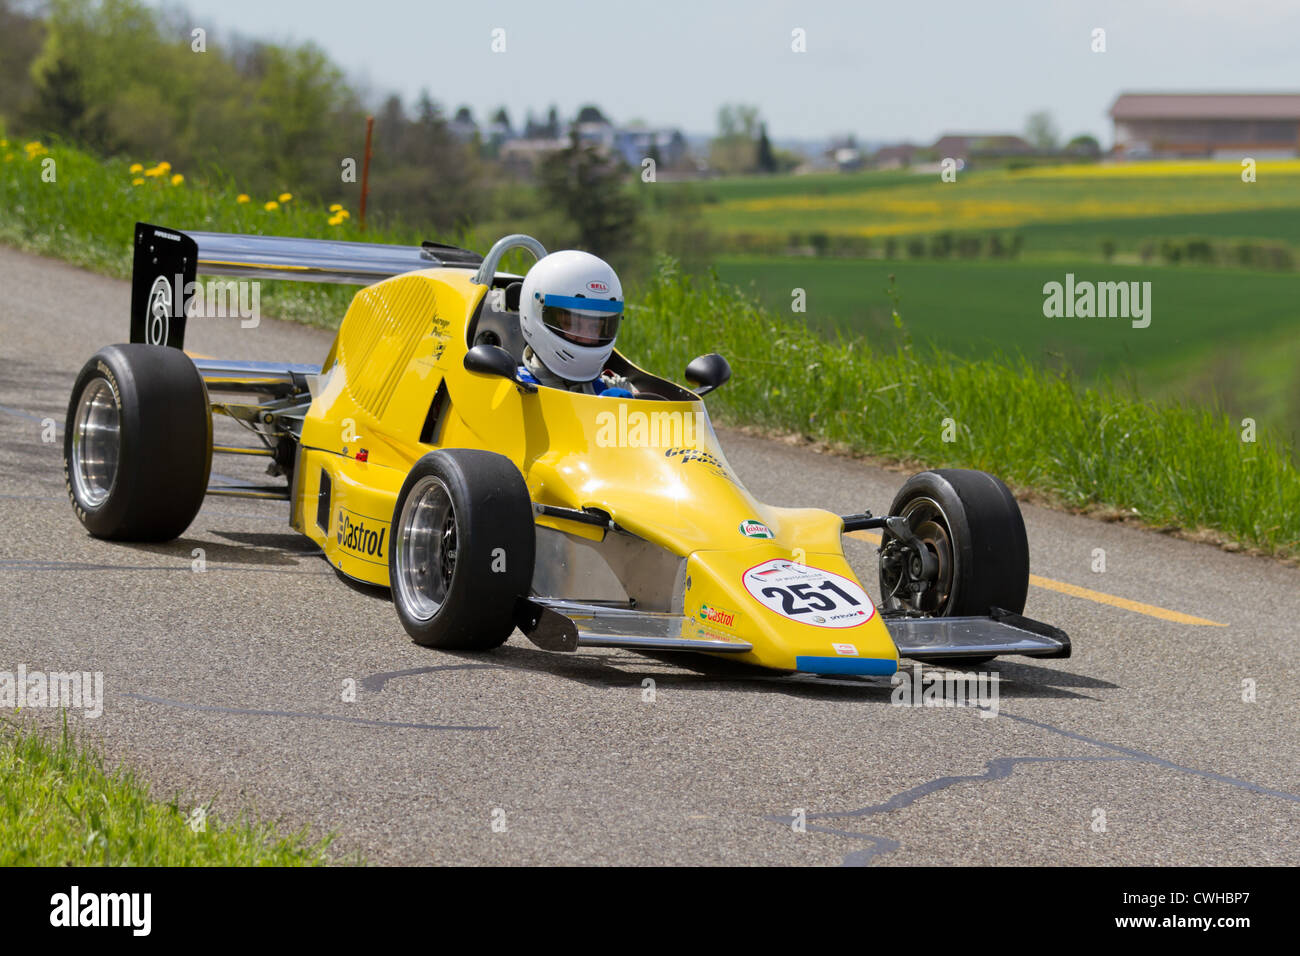 Vintage race car Schiesser MK5 FF2000 from 1978 at Grand Prix in  Mutschellen, SUI on April 29, 2012 Stock Photo - Alamy